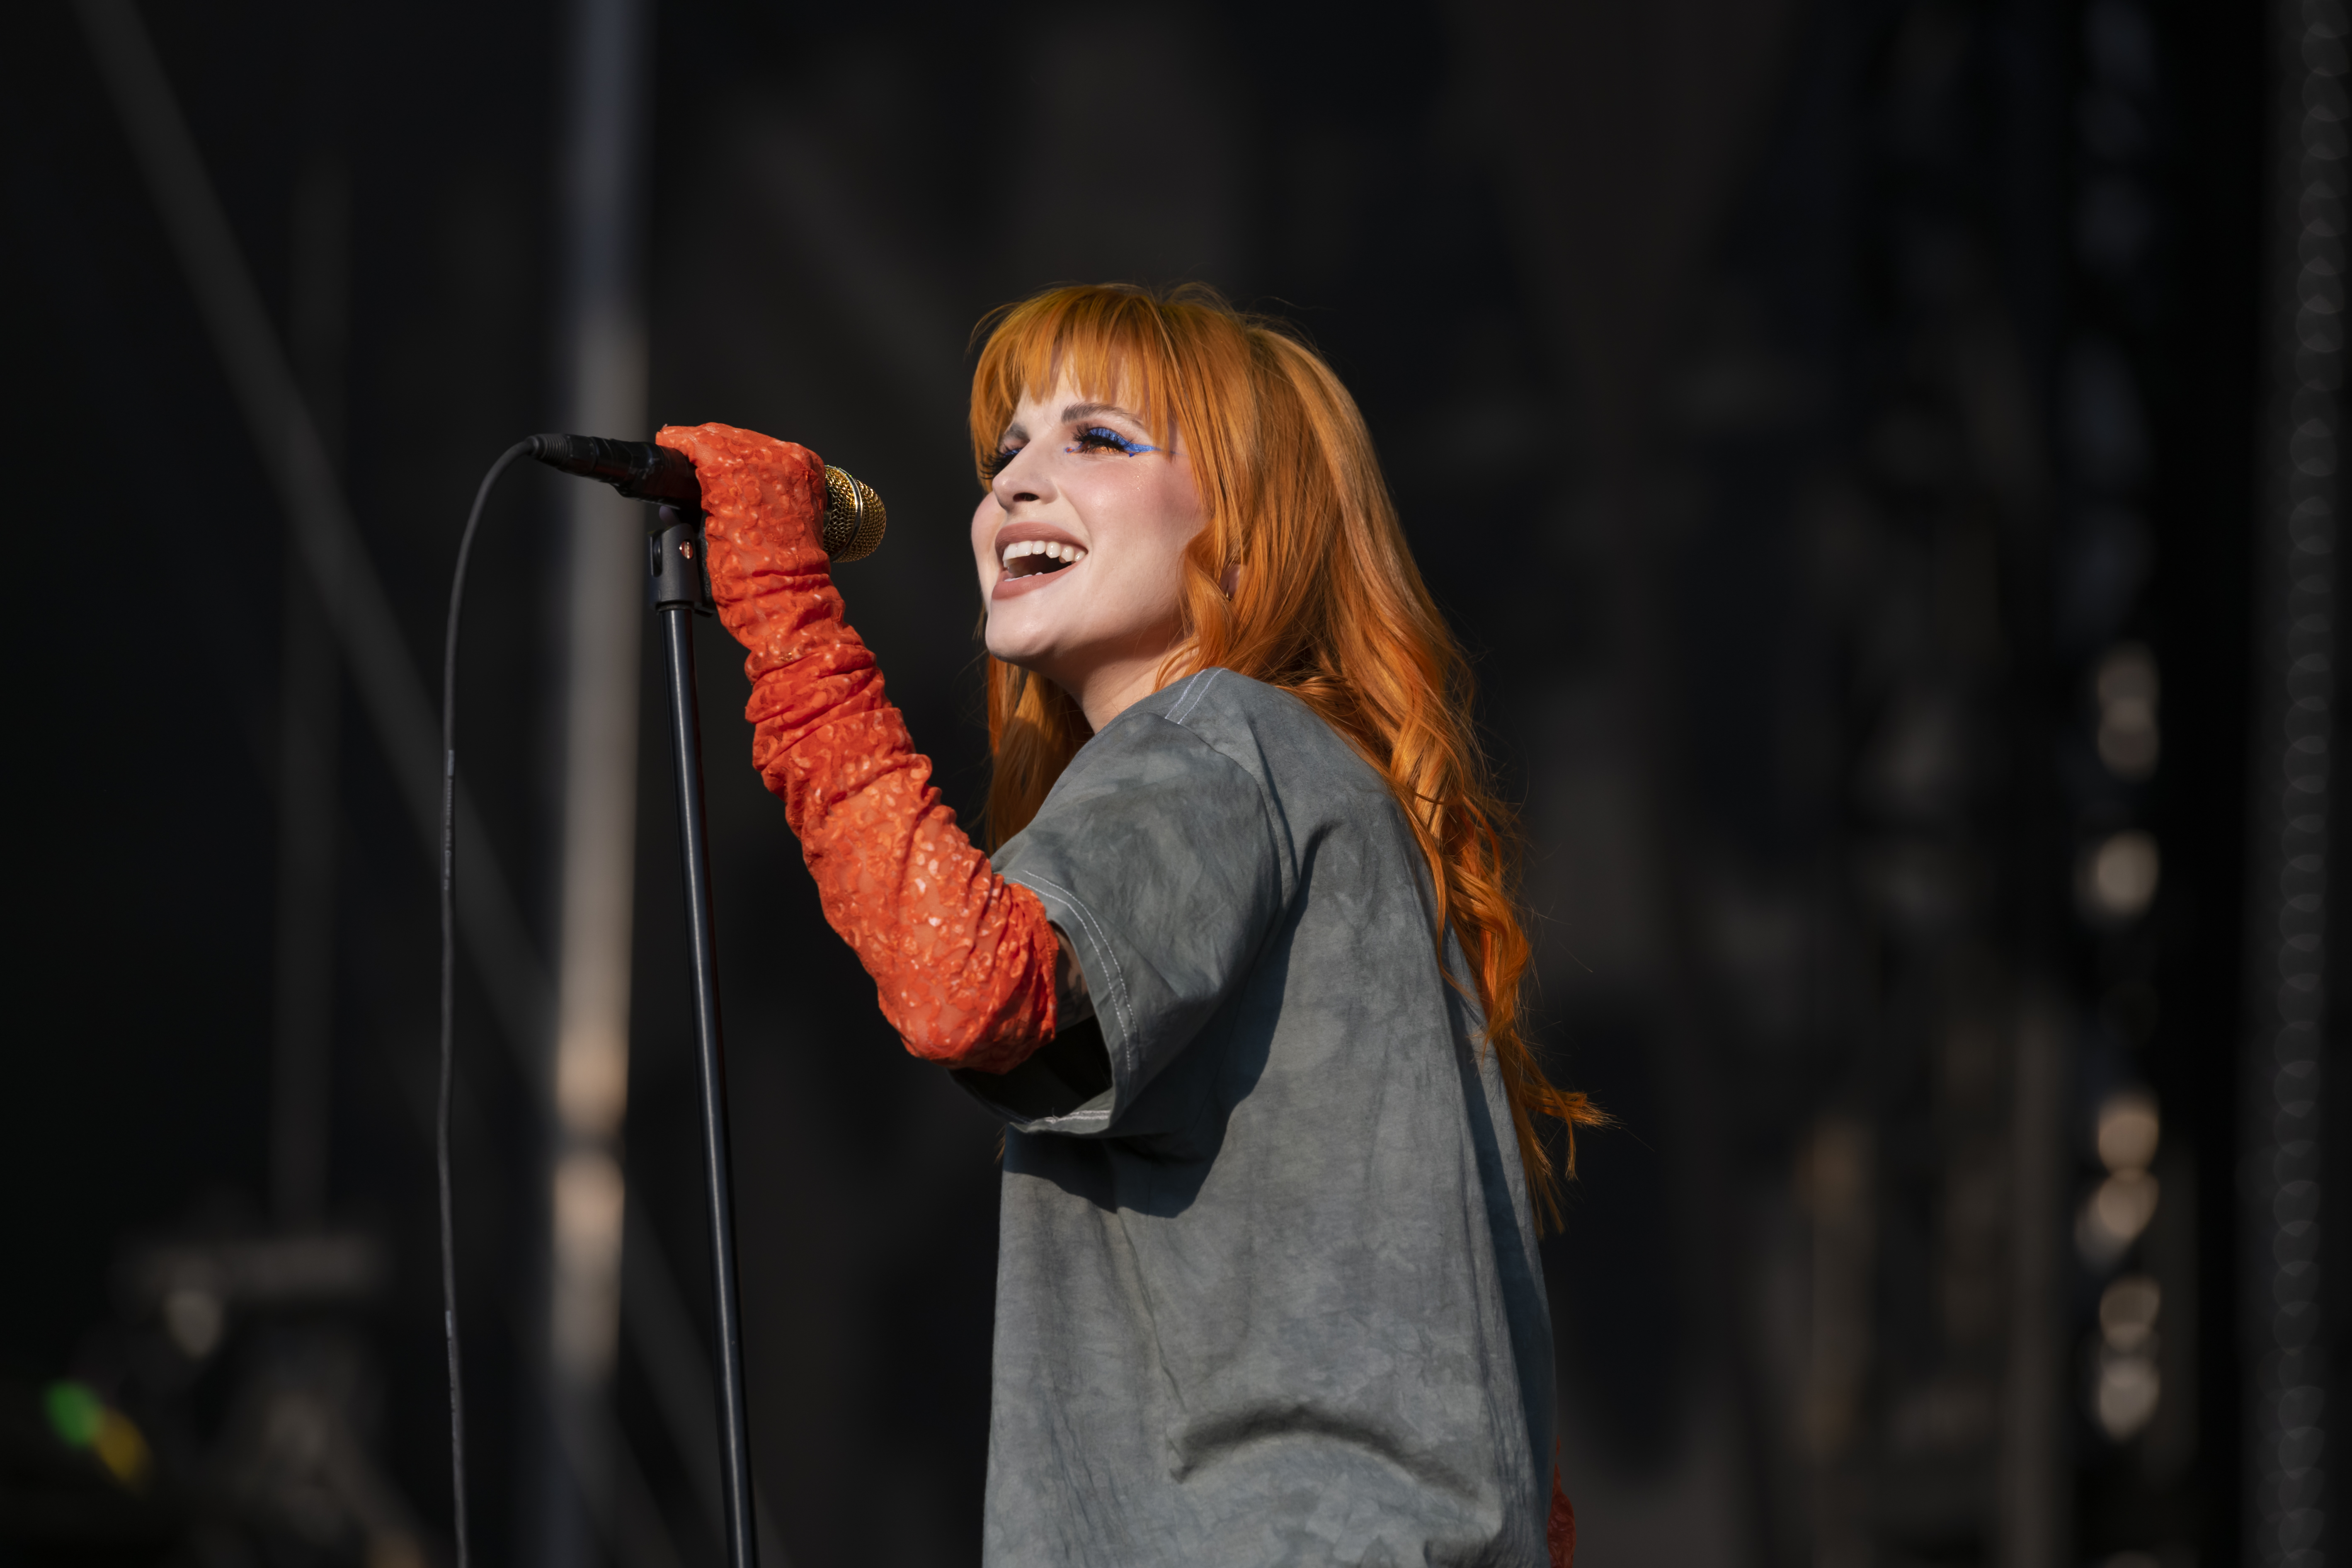 Hayley Williams (Paramore), 10/17/09 Brand New Eyes Tour Pa…